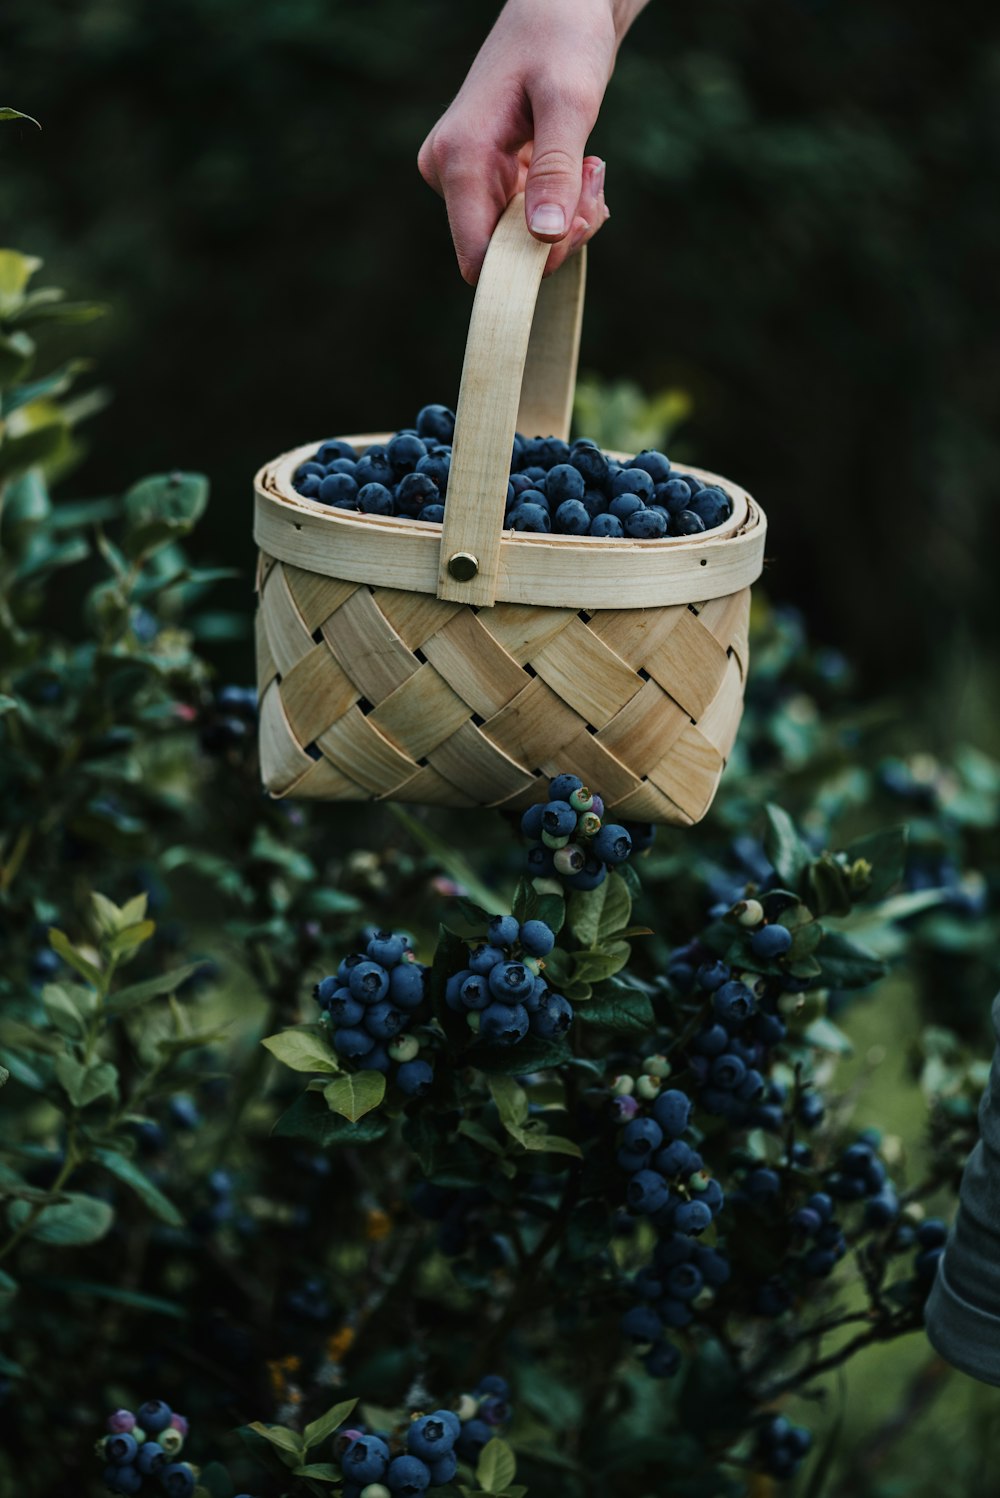 a hand holding a wooden spoon over a basket of blueberries